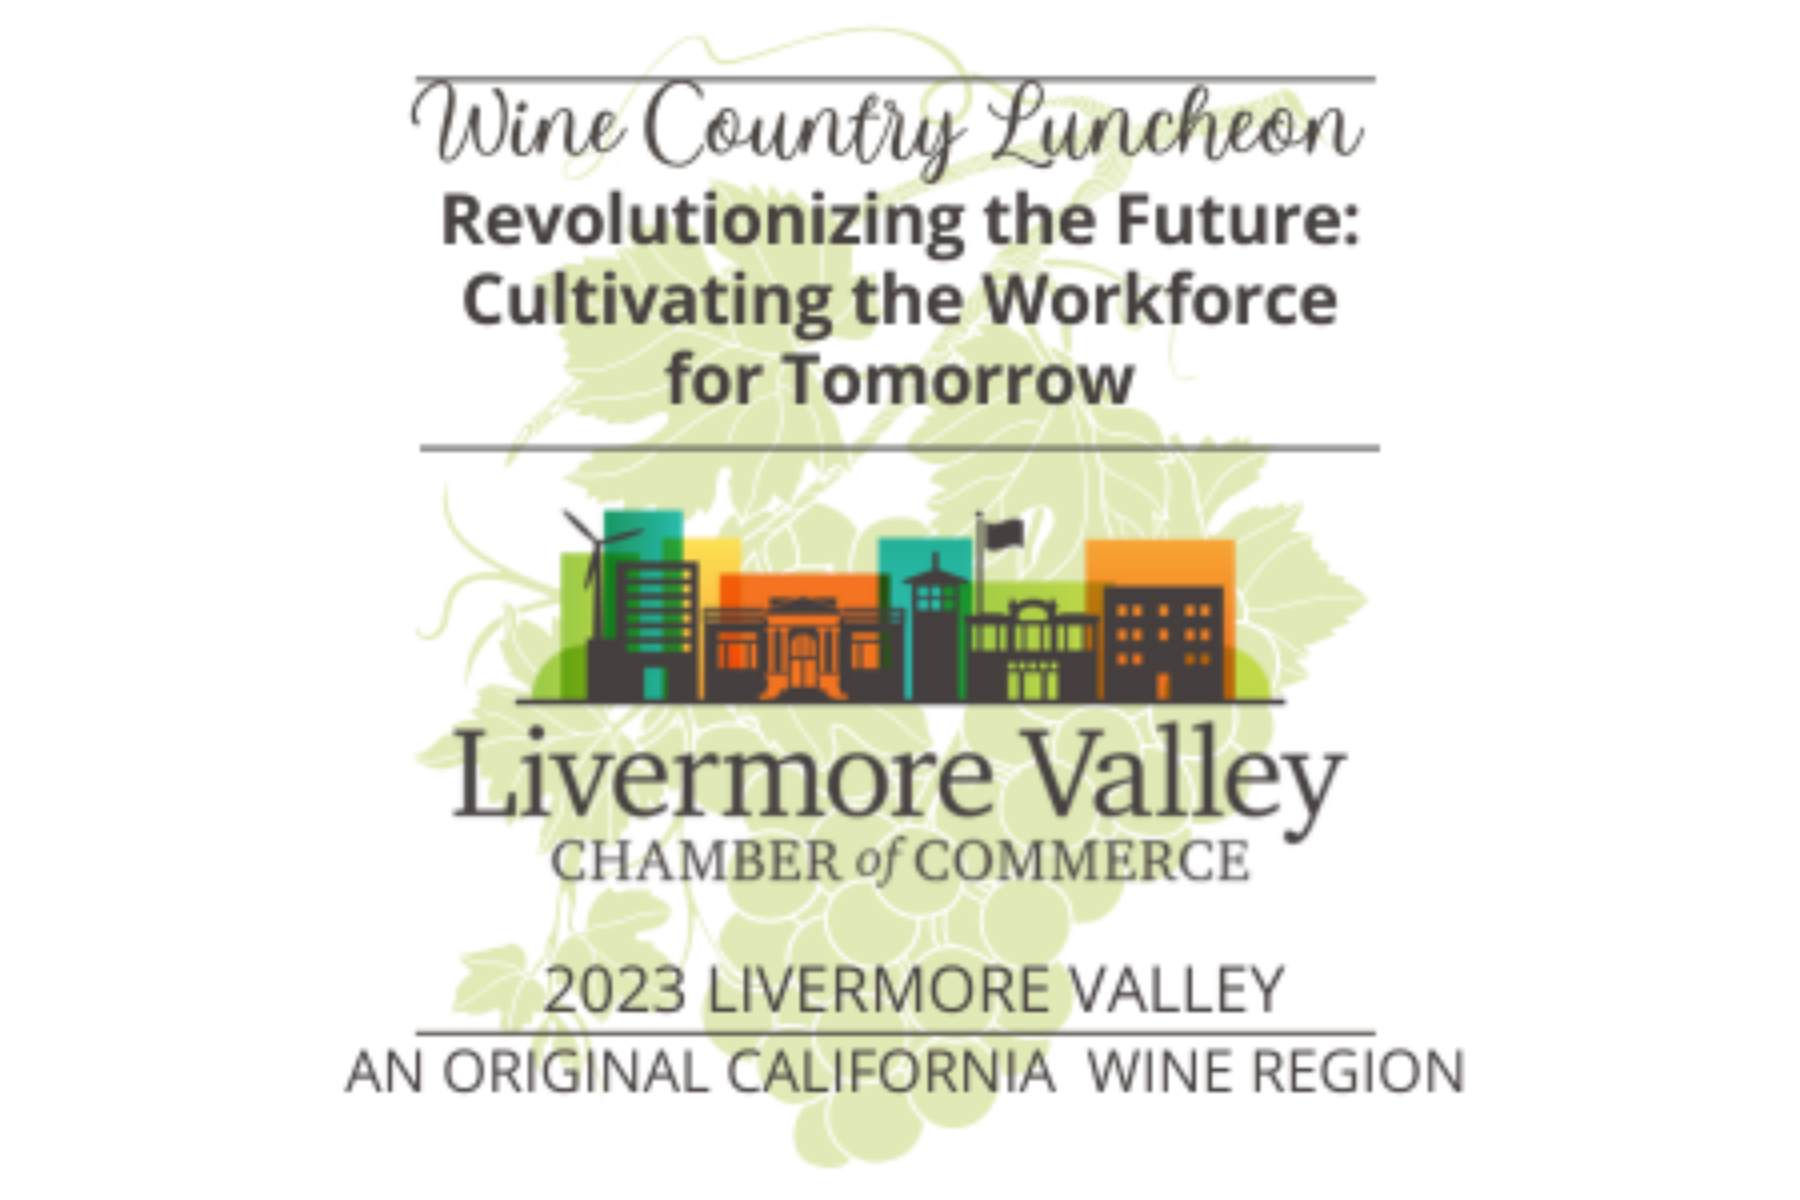 Livermore Valley Chamber of Commerce Holds Informational Workforce Development Wine Country Luncheon